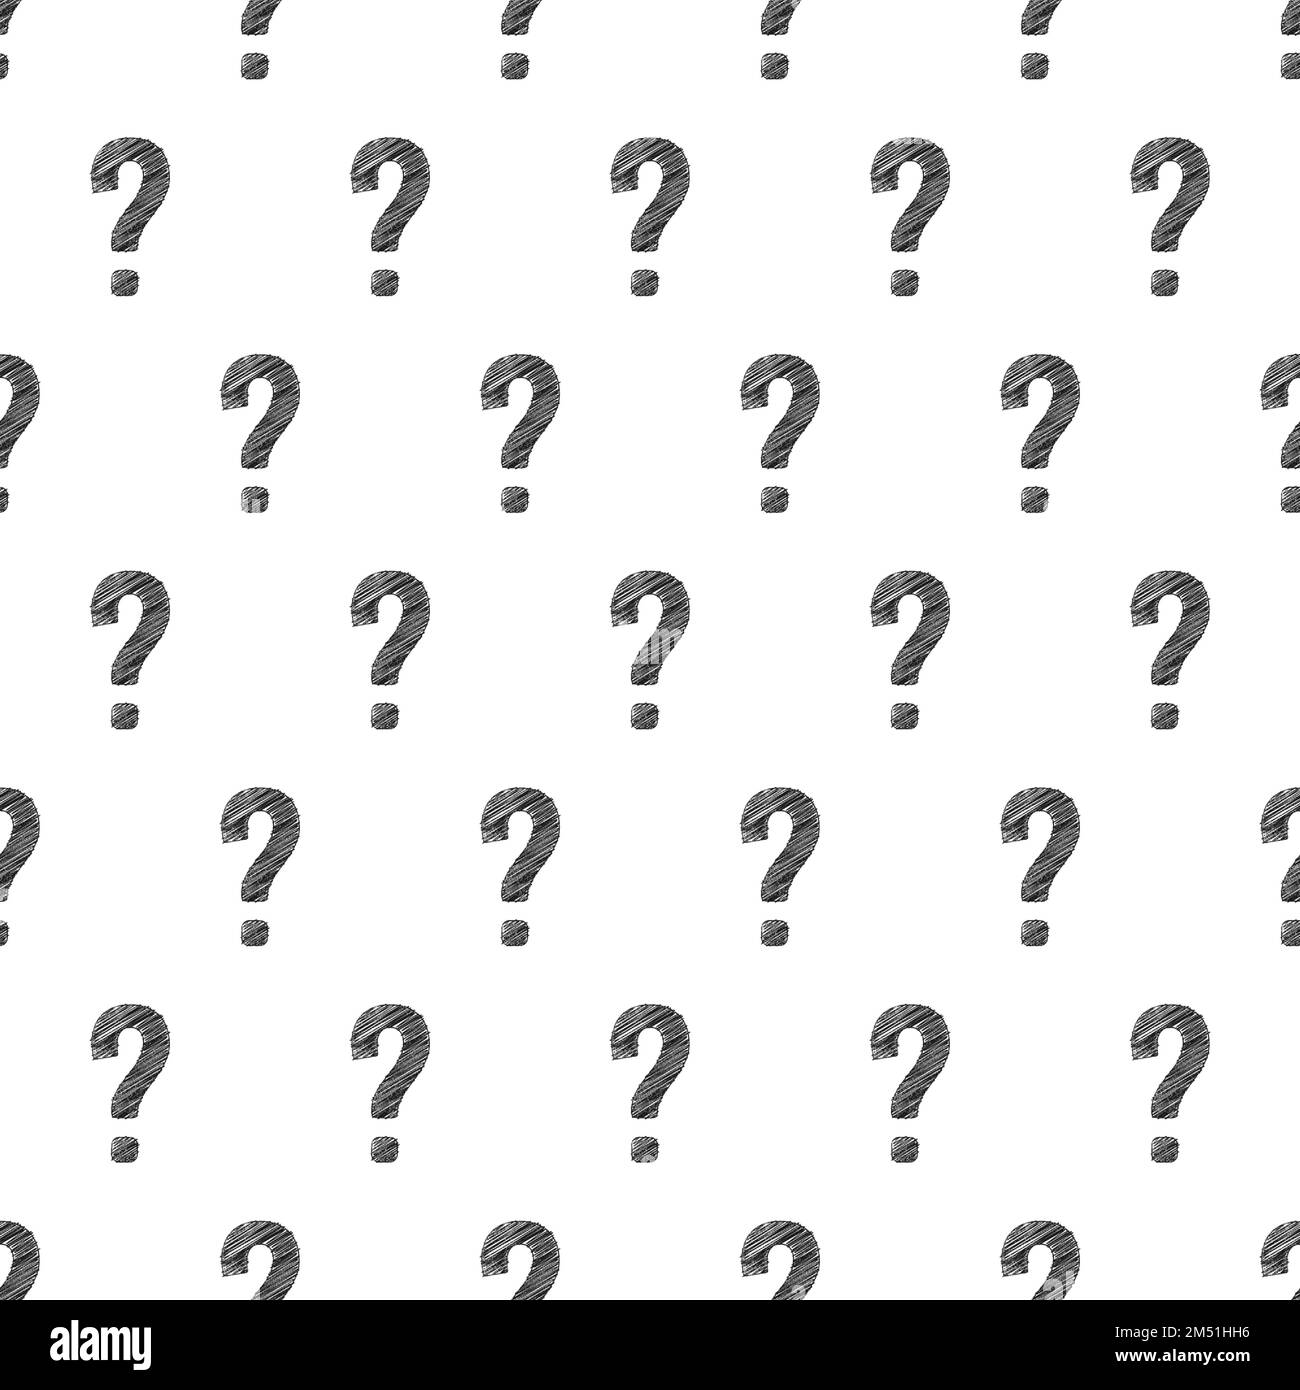 Question mark seamless pattern. Repeating interrogation patern. Hand drawn black simple icon on white sample background. Repeated modern wallpaper Stock Vector